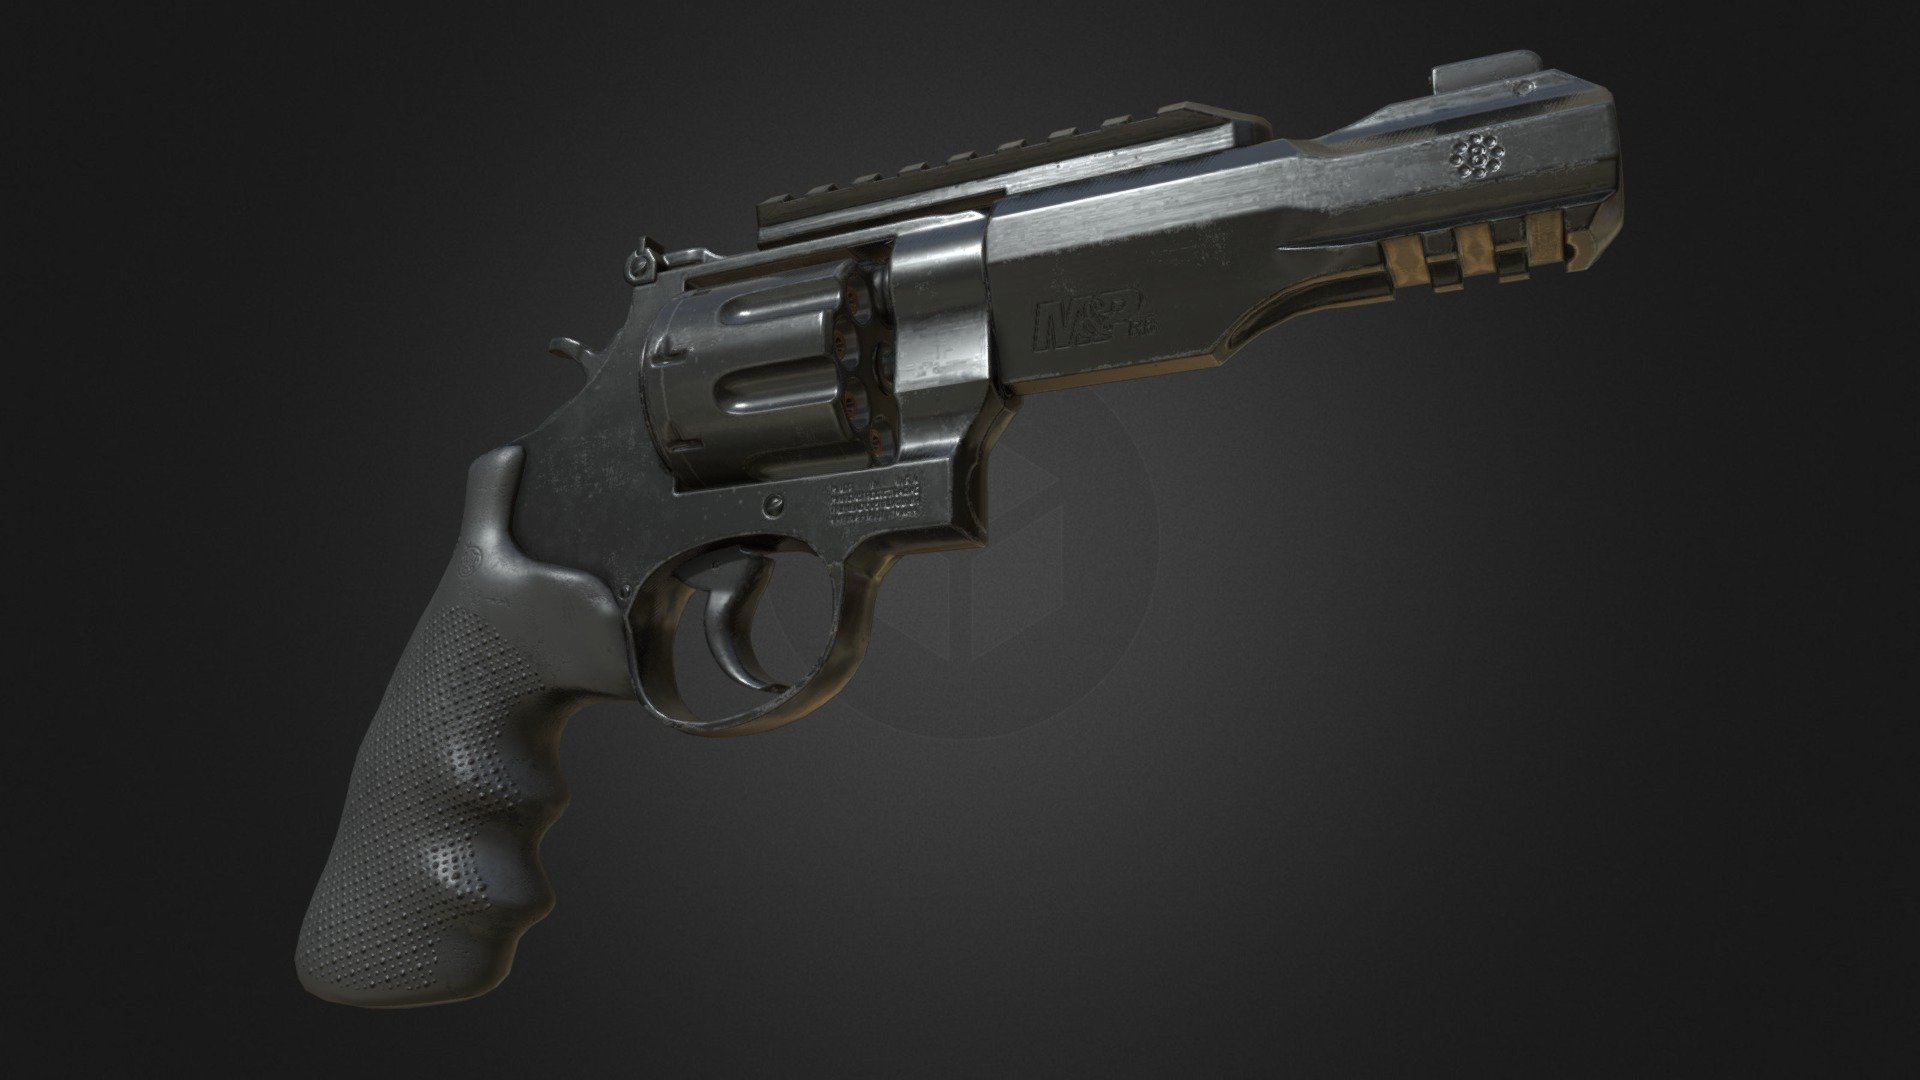 Smith-Wesson M&amp;P R8 Revolver PBR N-FRAME SERIES is an optimized model with excellent texturing for best outcome.

The model has an optimized low poly mesh with the greatest possible number of simplifications that do not affect photo-realism but can help to simplify it, thus lightening your scene and allowing for using this model in real-time 3d applications.

In this product, all objects are ERROR-FREE. All LEGAL Geometry. Subdivisions are not required for this product. Real-world accurate model.


Format Type



3ds Max 2017 (Default Physical PBR Shader)

FBX

OBJ

3DS


Texture Type
1 material used. 1 set of:




Albedo

Metalness

Roughness

Normal

You might need to re-assign textures map to model in your relevant software

You might need to flip green channel of Normal map according to your relevant softwar - Smith-Wesson M&P R8 Revolver PBR - Buy Royalty Free 3D model by 3d Assets Gun (@3dassetsgun) 3d model